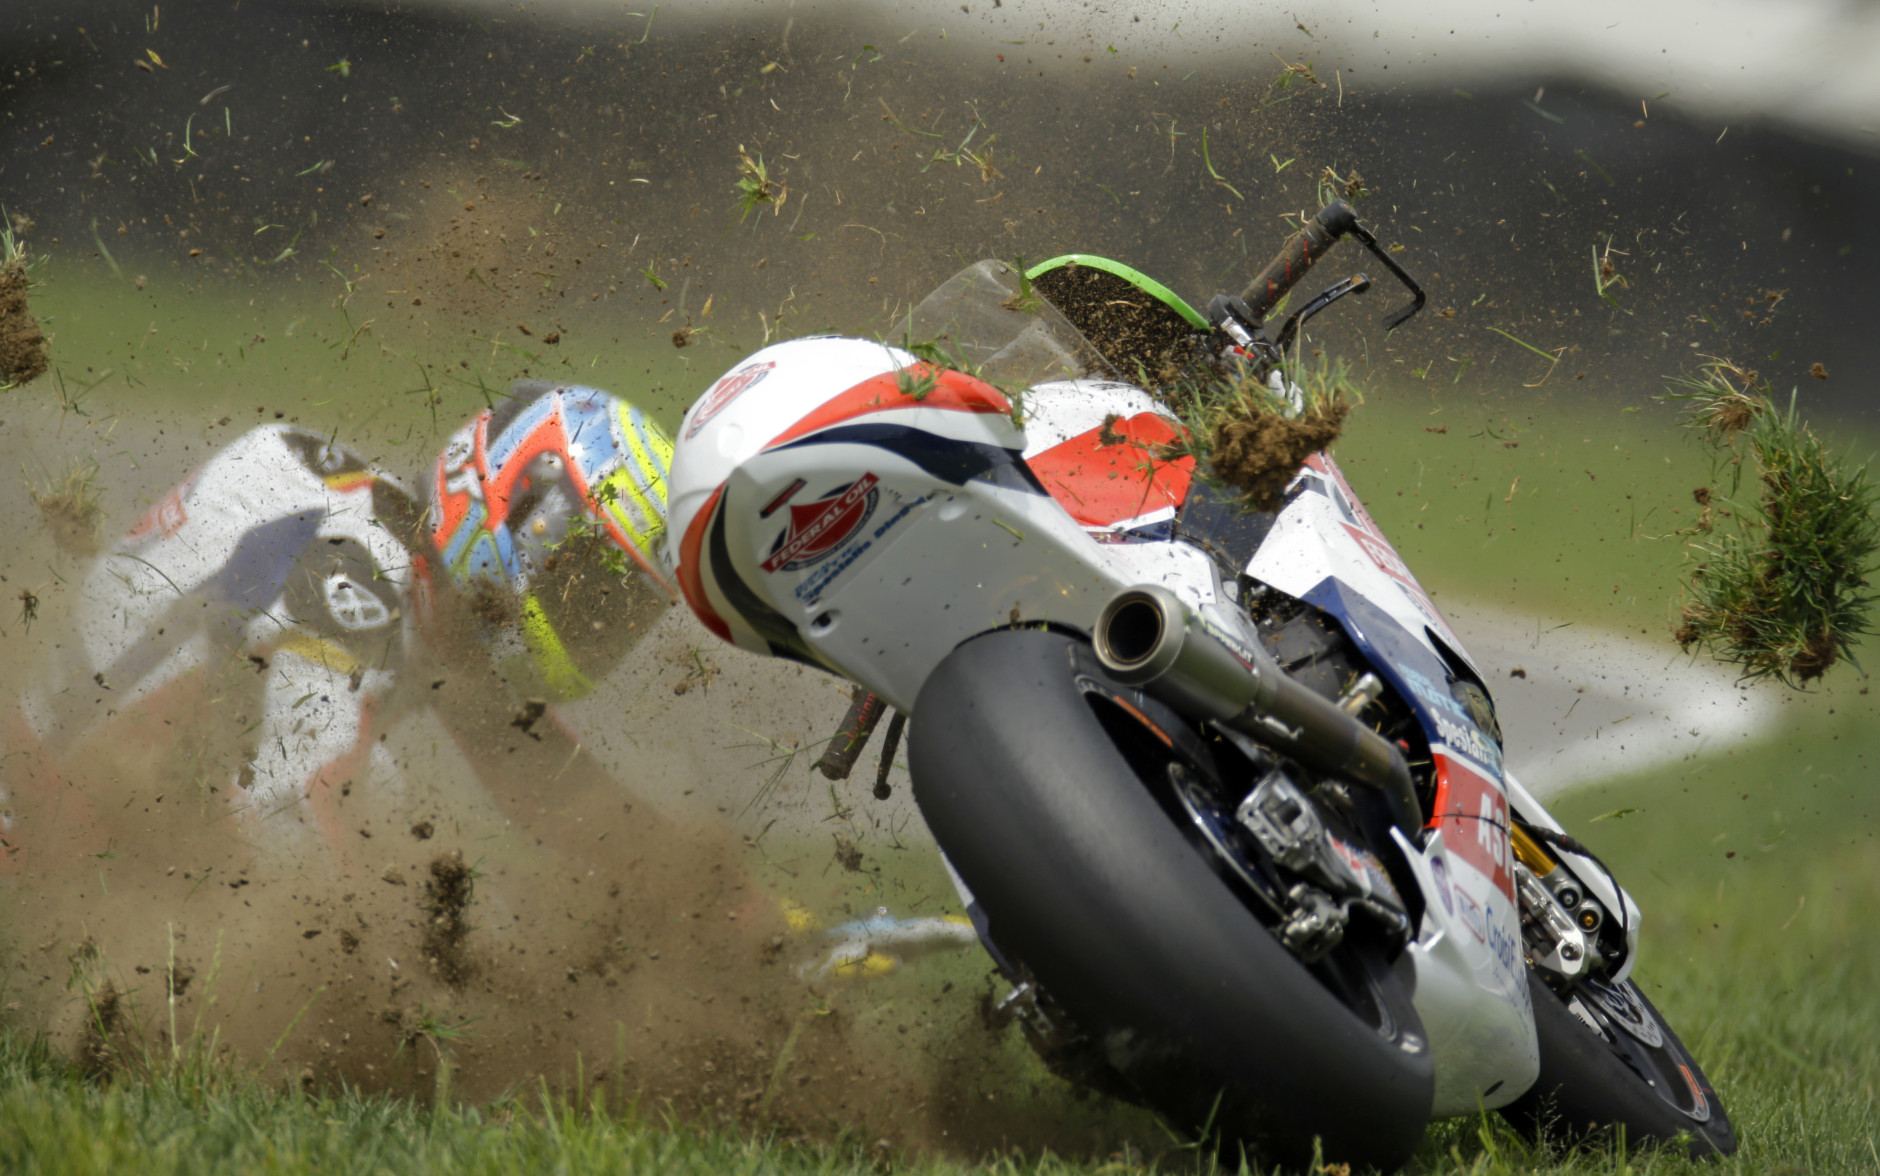 FOR USE AS DESIRED, YEAR END PHOTOS - FILE - Xavier Simeon, of Belgium, crashes during Indianapolis Moto 2 motorcycle race at the Indianapolis Motor Speedway in Indianapolis, Sunday, Aug. 10, 2014. (AP Photo/Michael Conroy, File)